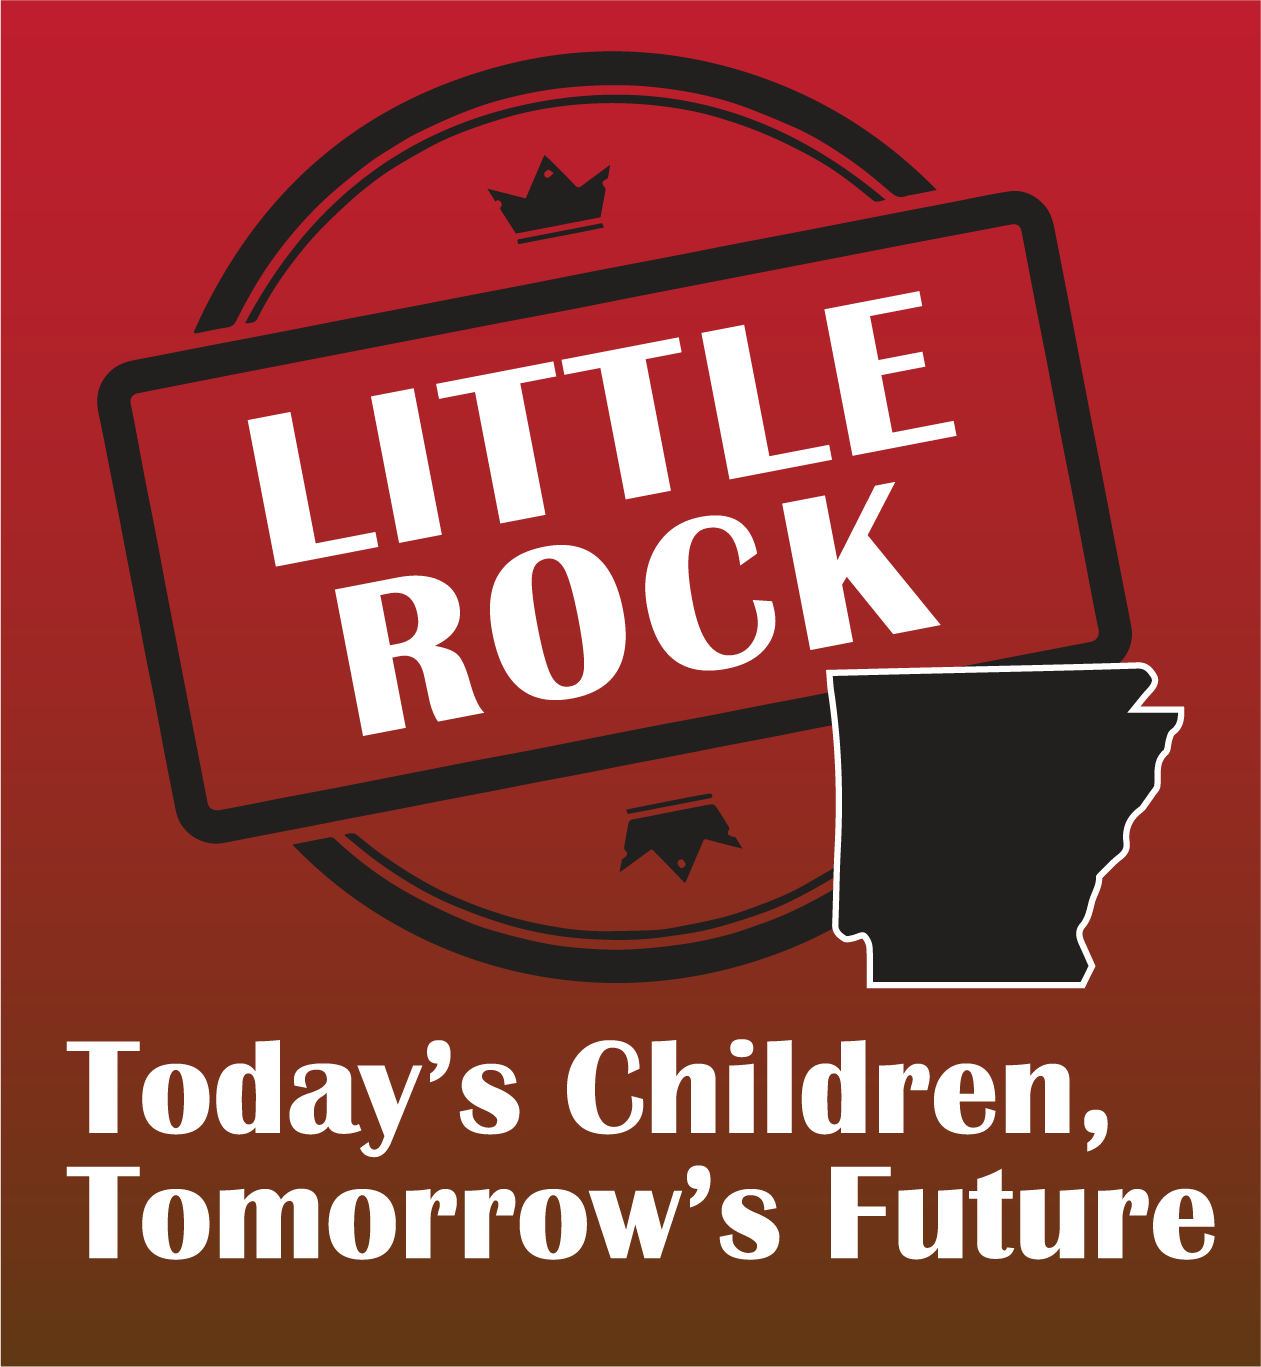 Image for Today's Children Tomorrow's Future - Little Rock